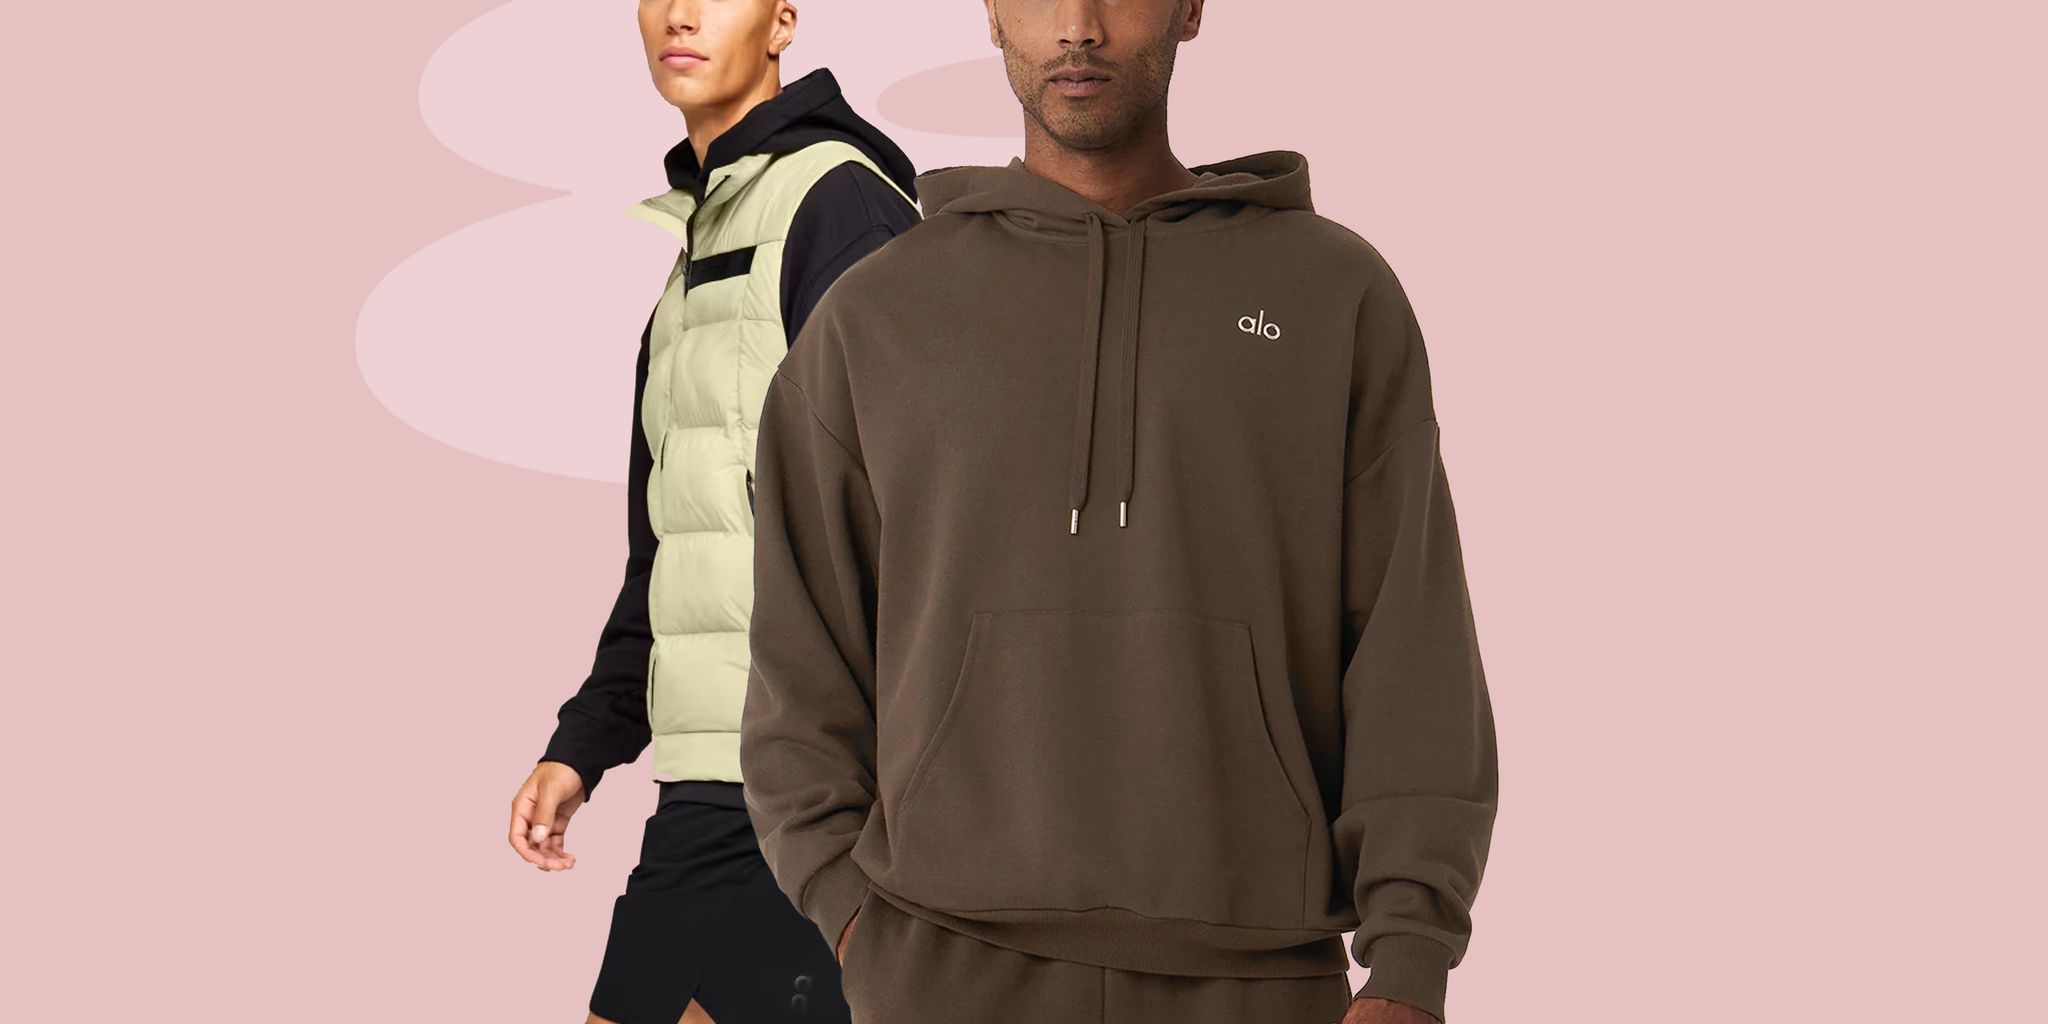 Fashionably late' Men's Hoodie